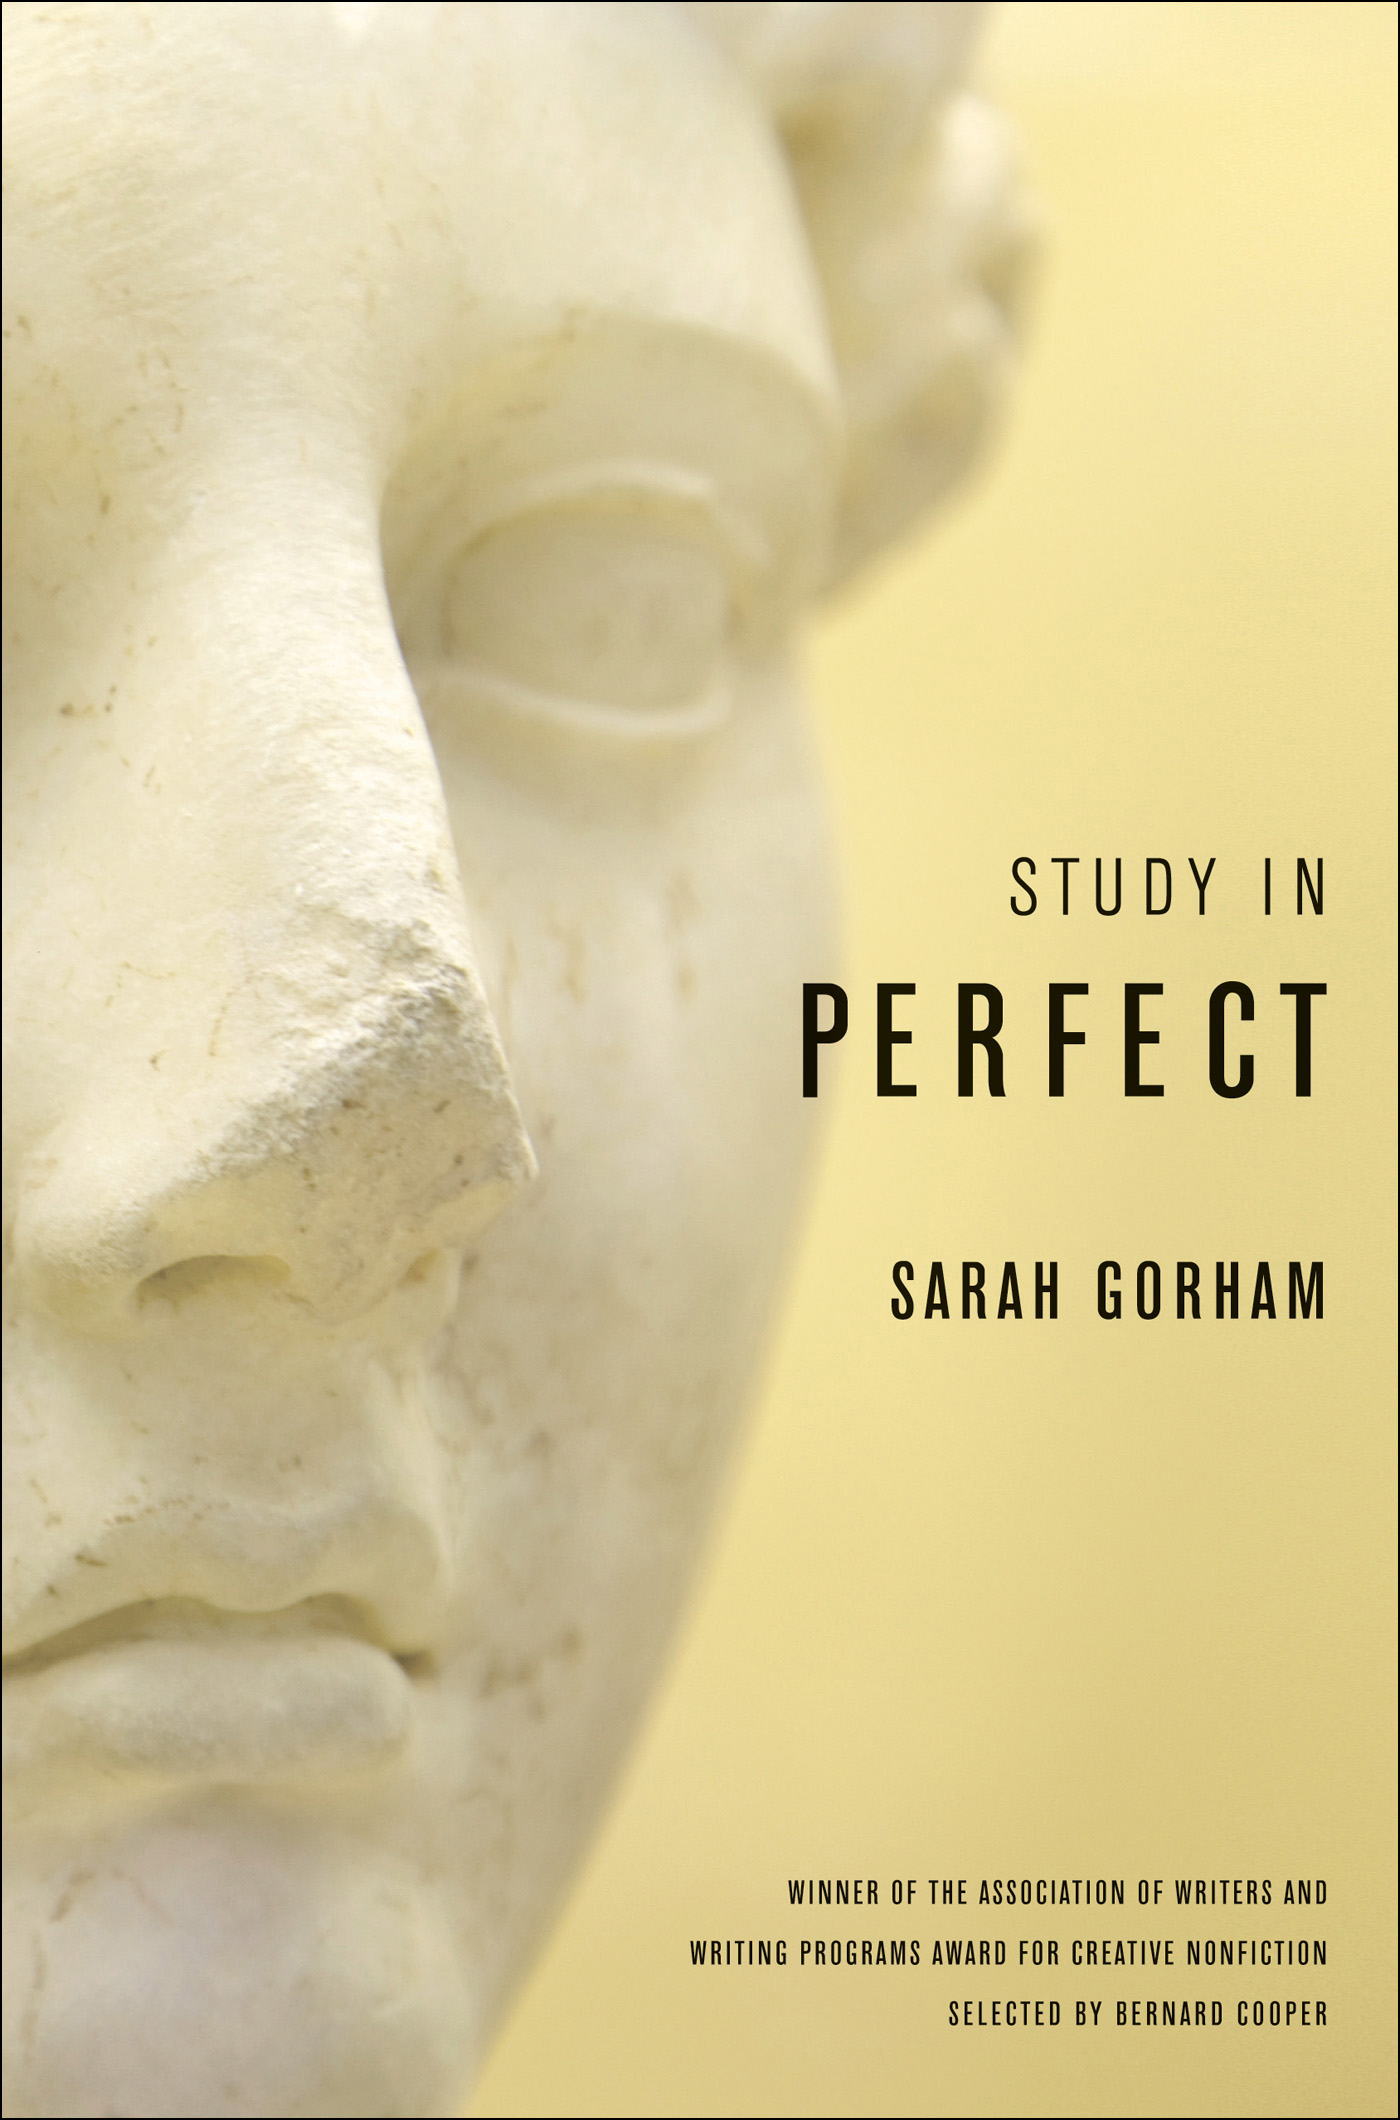 Study in Perfect (2004) by Sarah Gorham